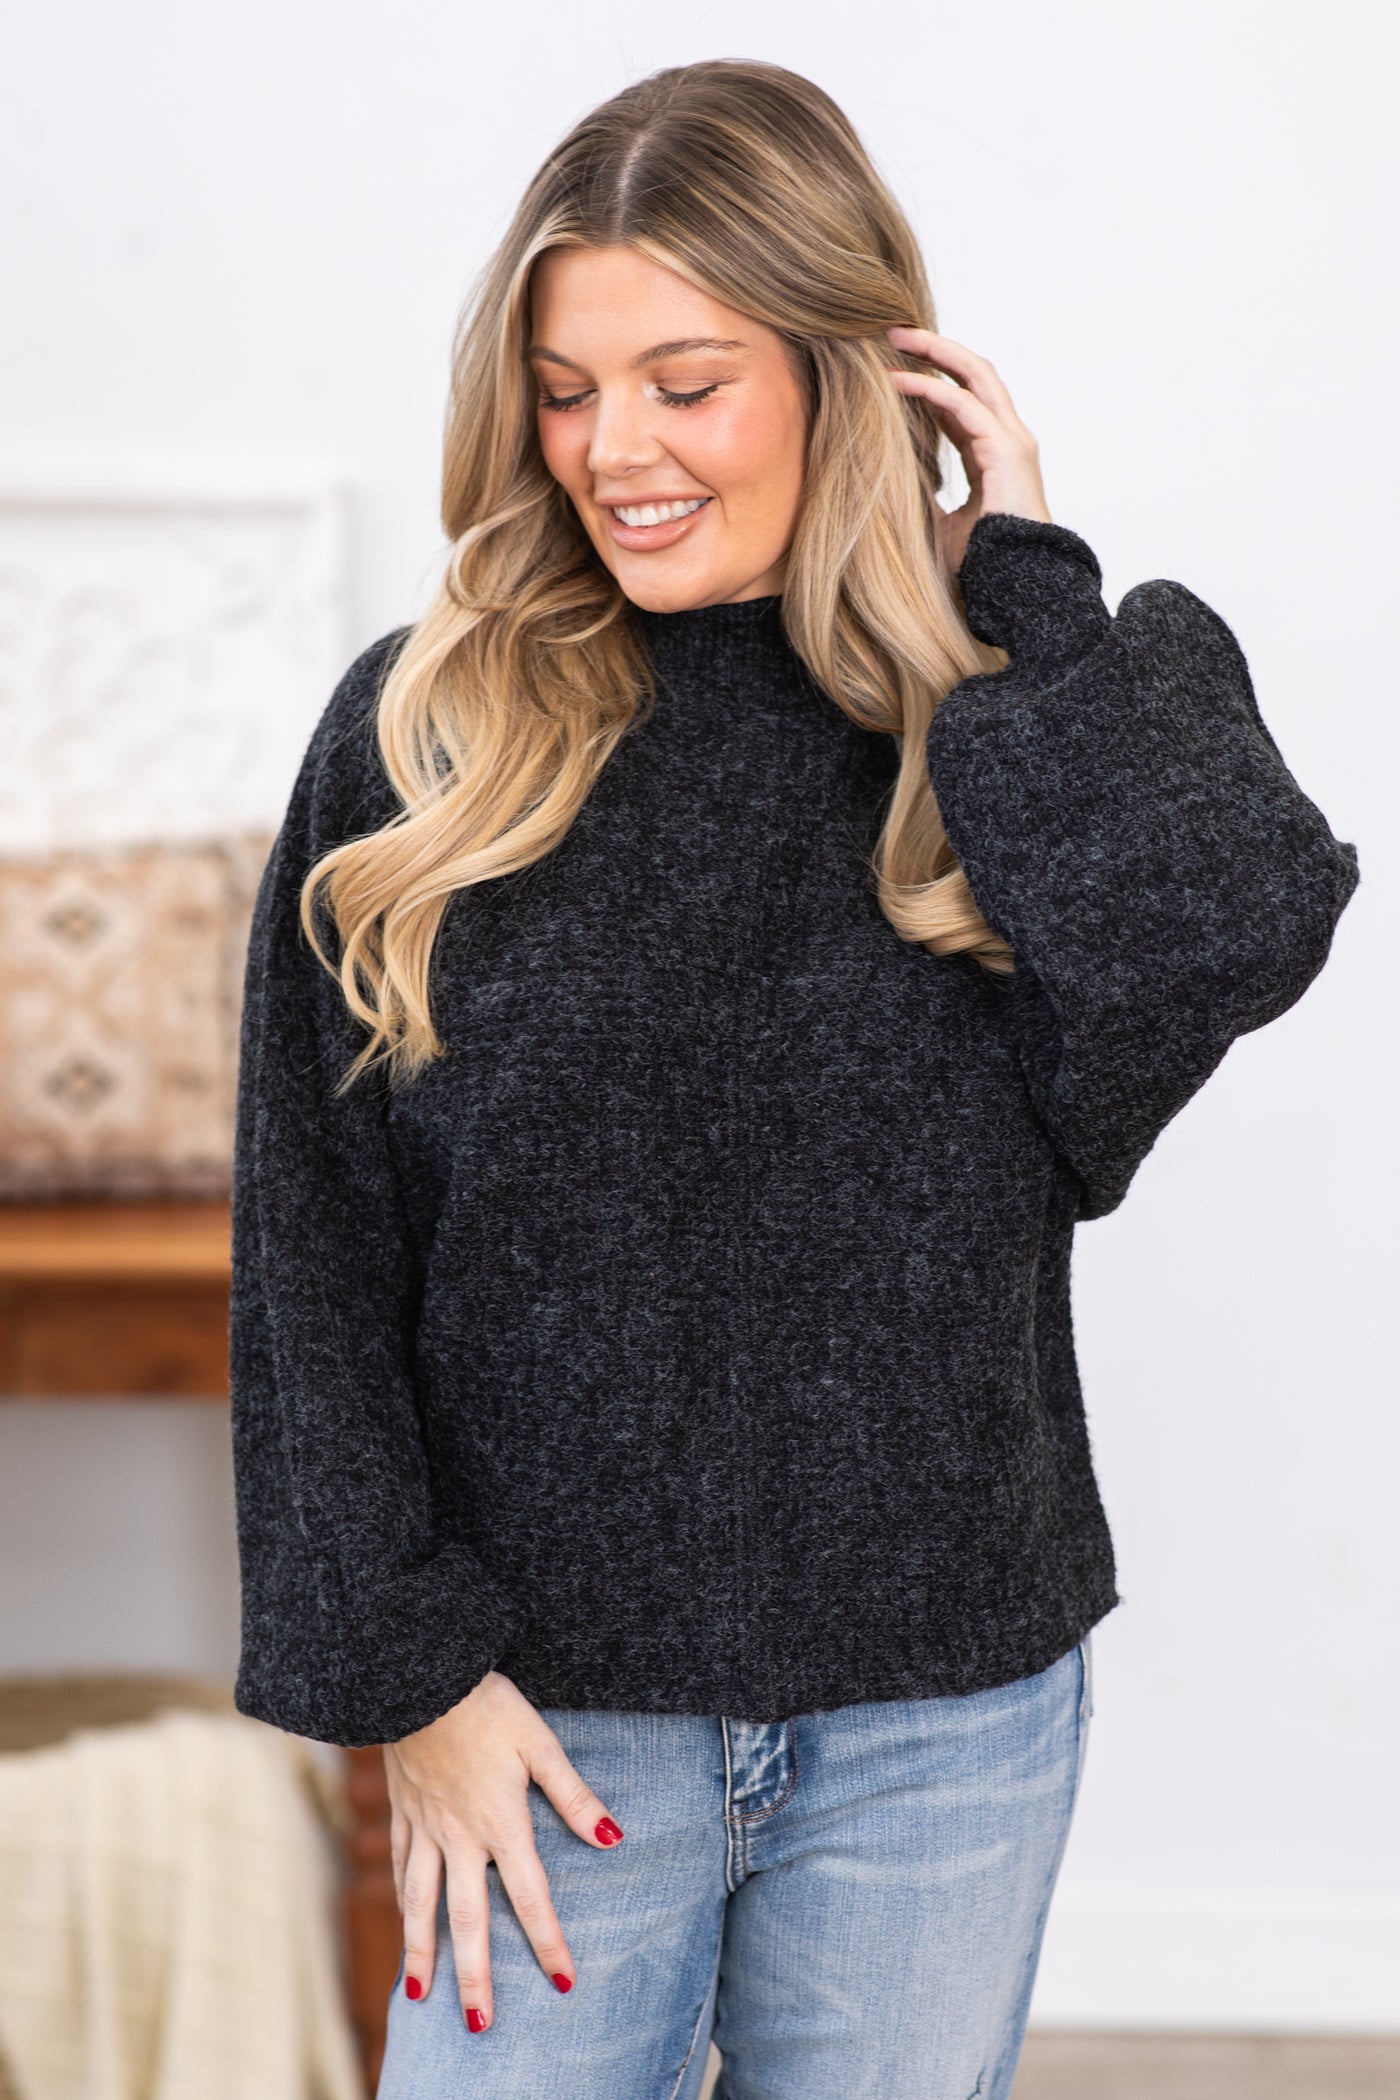 Black Balloon Sleeve Sweater With Seam Detail